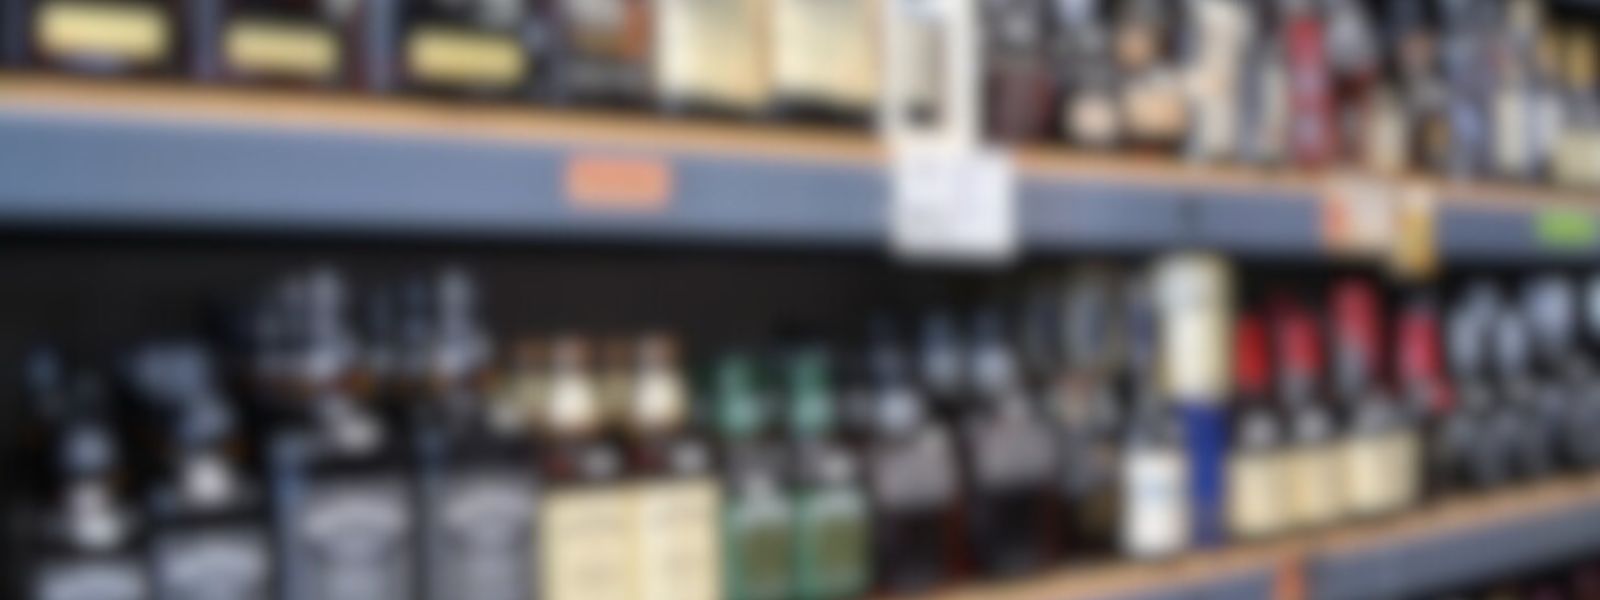 Operating hours of liquor stores, revised